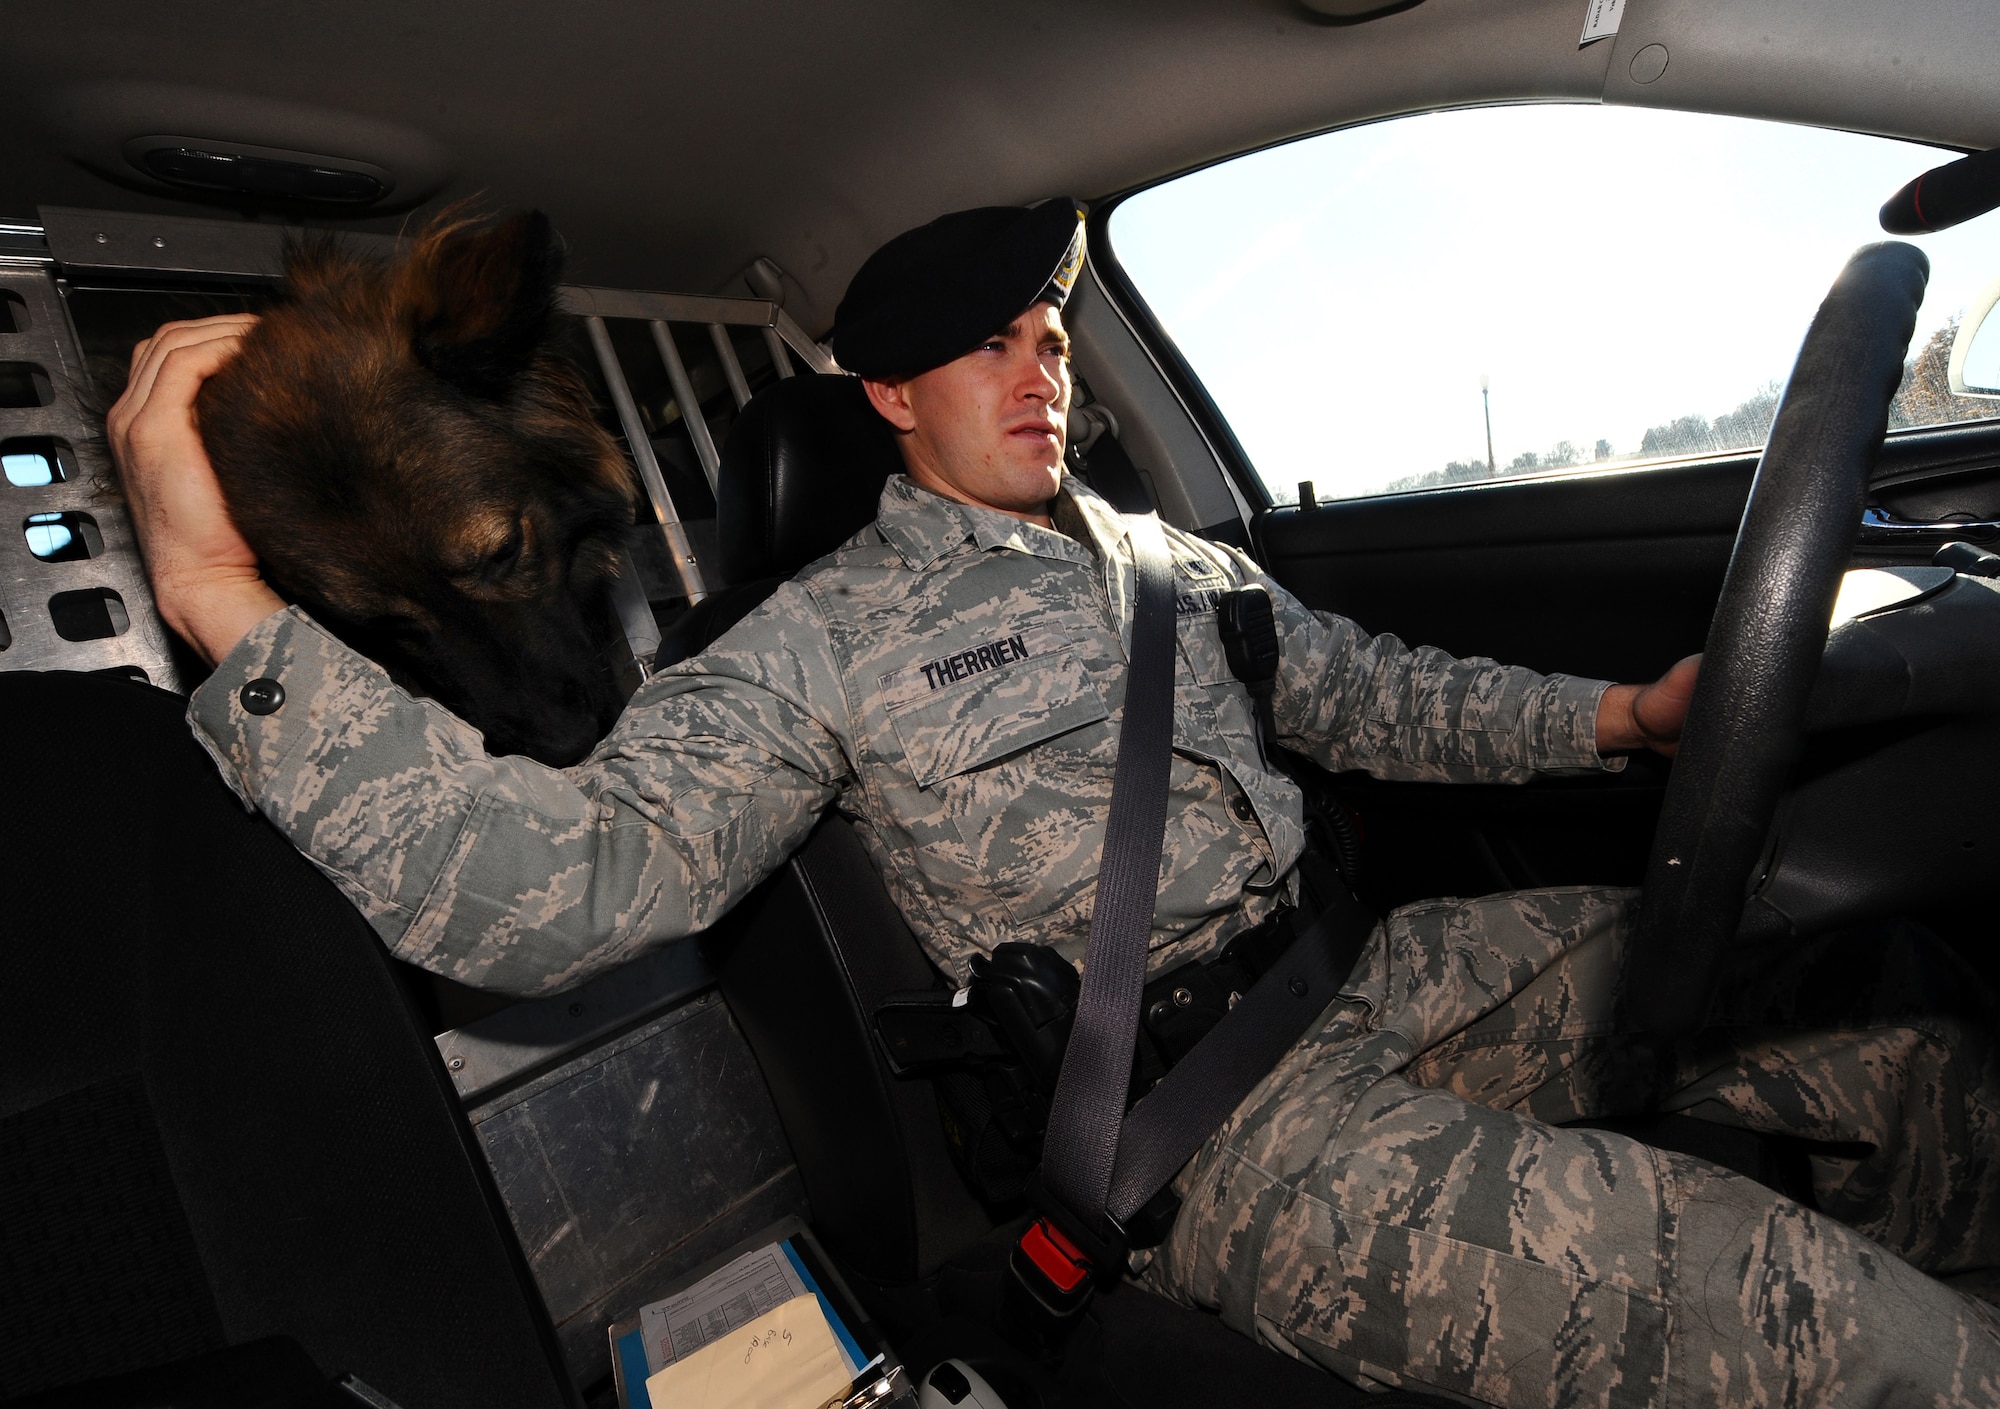 OFFUTT AIR FORCE BASE, Neb. - Staff Sgt. Joel Therrien, a military working dog handler with the 55th Security Forces Squadron, performs his daily patrols of Offutt and military housing with his loyal coworker, an 80 pound Belgian Tervuren named Dasty, at his side Dec. 1.  There is a strong bond between the Sergeant Therrien and Dusty as they spend 12 hours, side by side, driving around the streets of Capehart and Offutt guarding wing assets and protecting the people of Team Offutt.  U.S. Air Force Photo by Josh Plueger (Released)